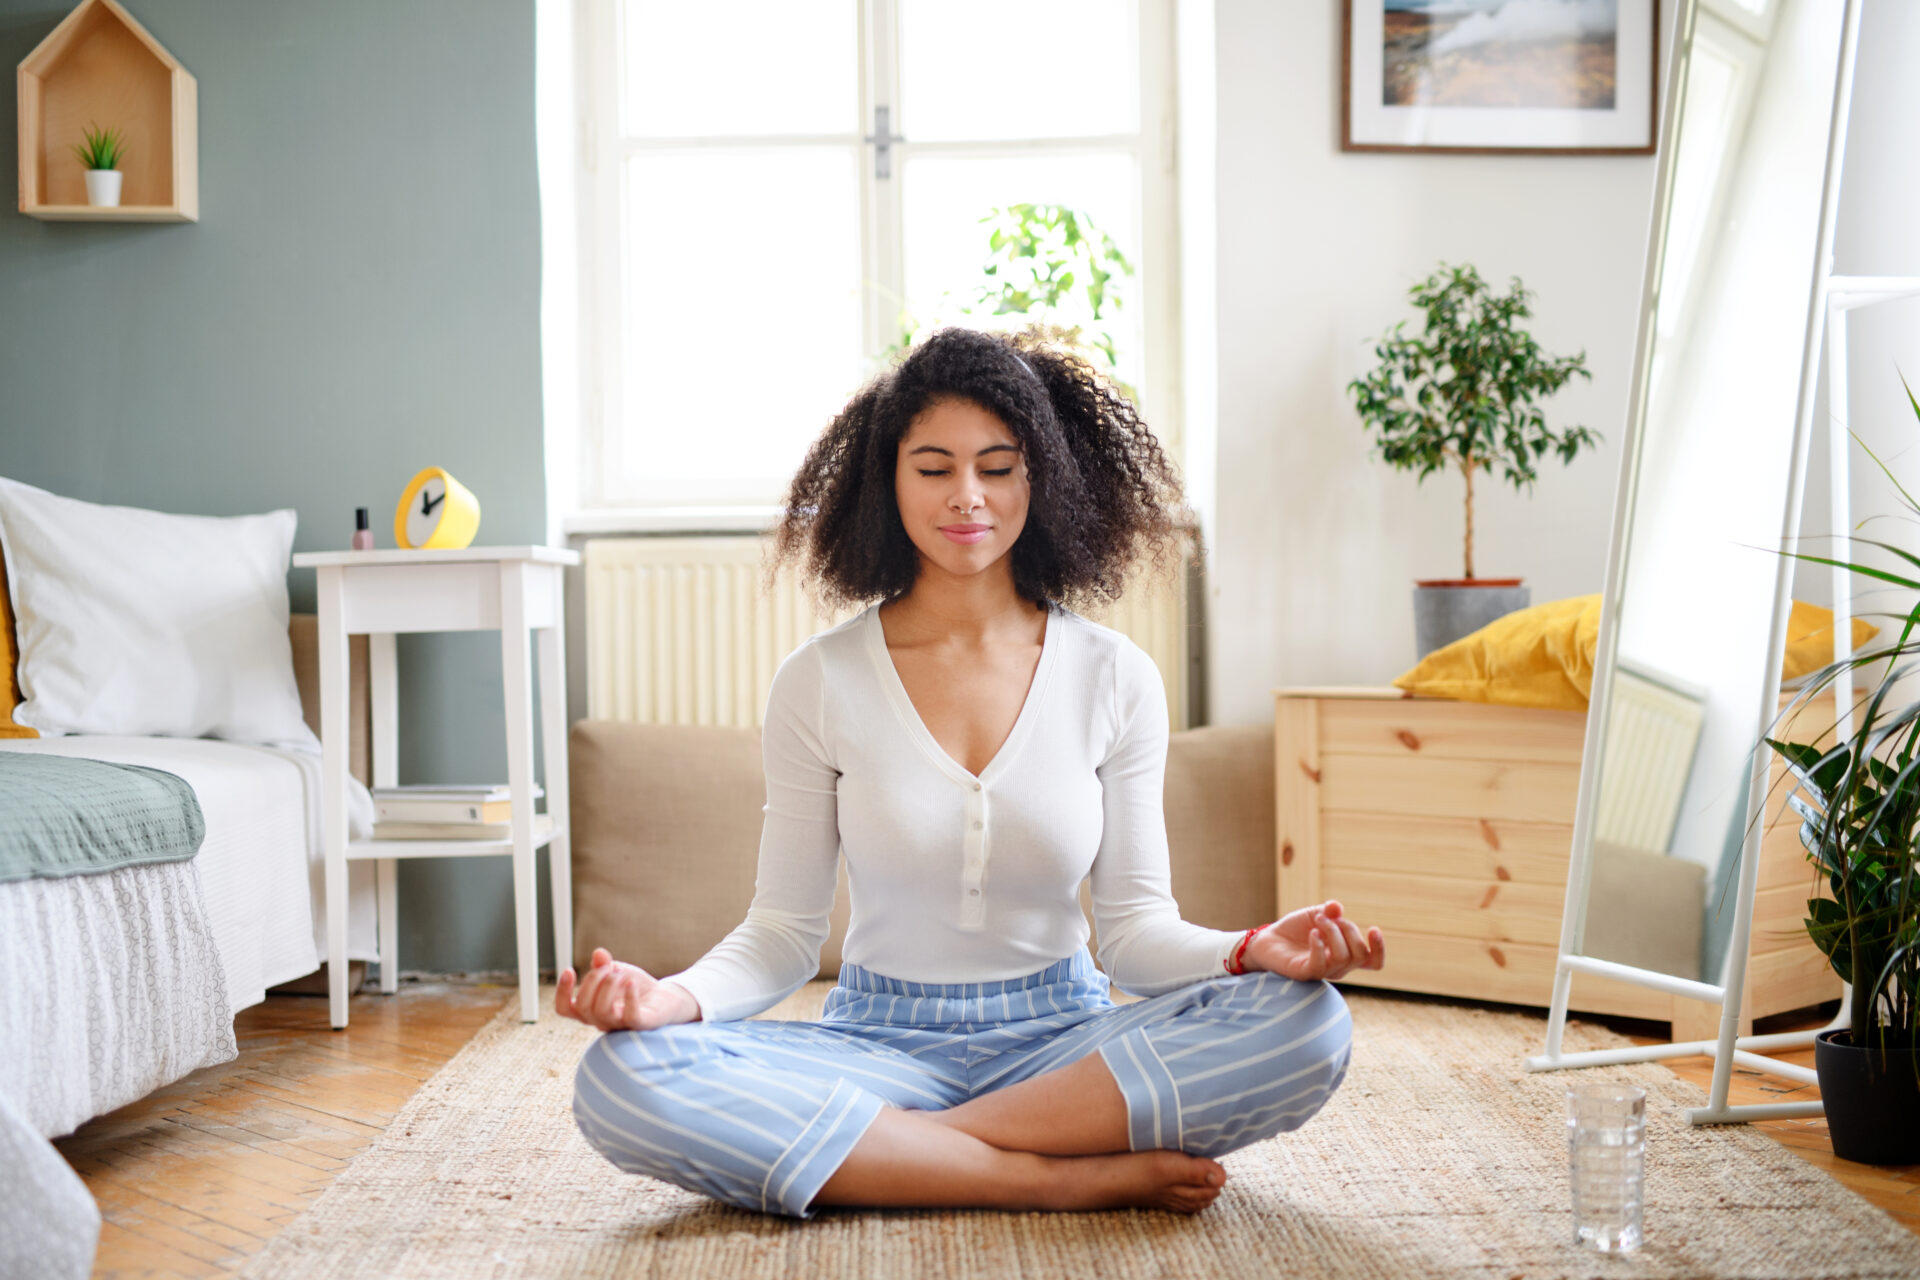 How to Stimulate the Vagus Nerve for Mind-Body Health